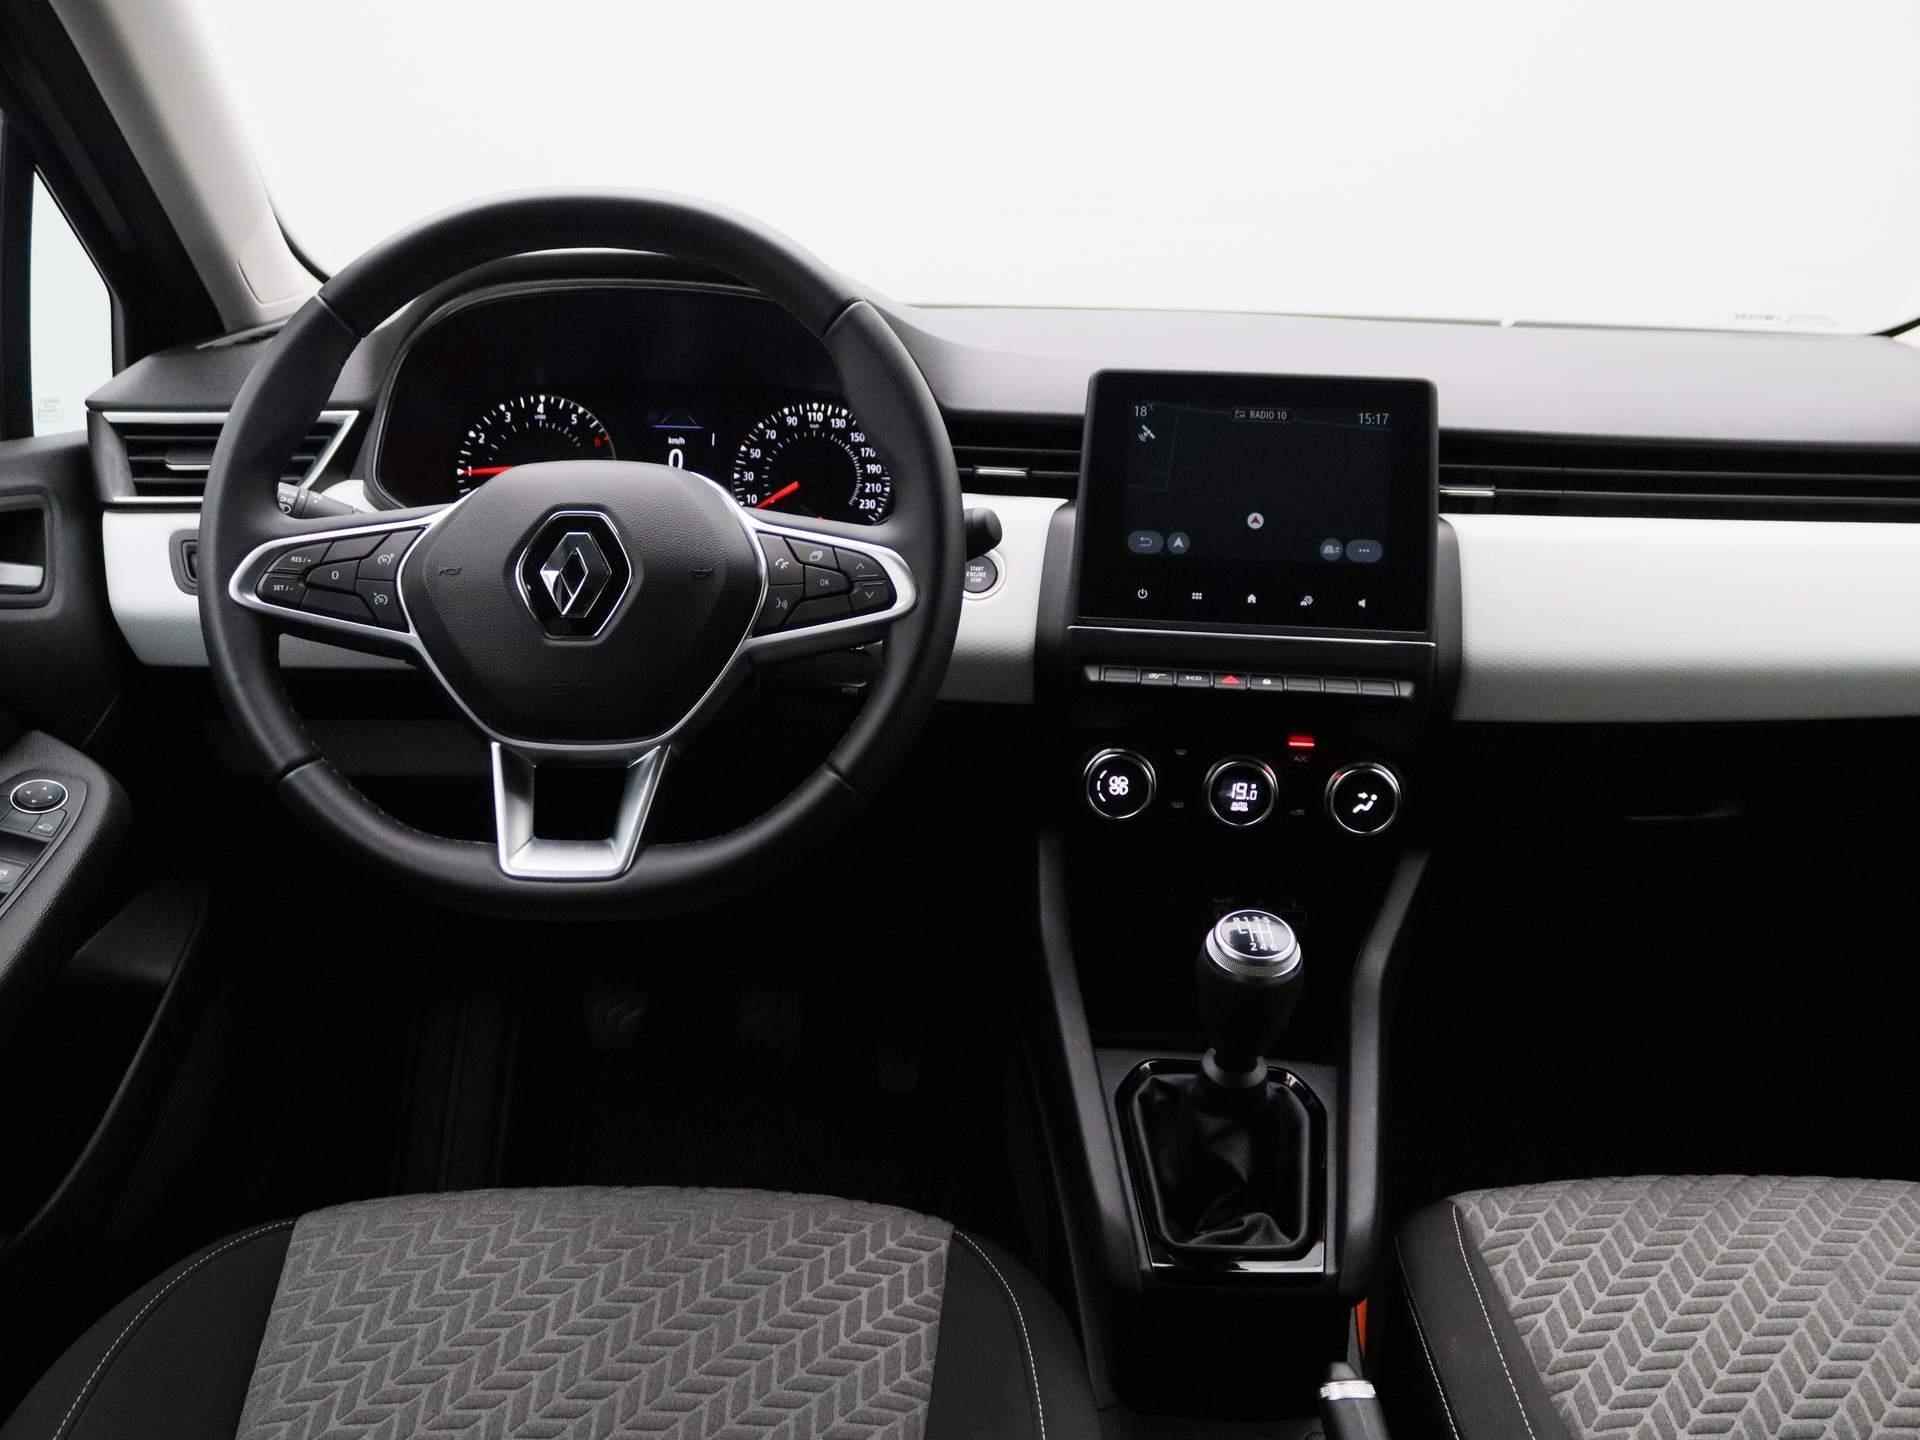 Renault Clio 1.0 TCe 90 Evolution | Climate Control | Full-Map Navigatie | Privacy Glass | PDC Achter | Keyless | 16" LMV | Apple Carplay & Android Auto - 7/35